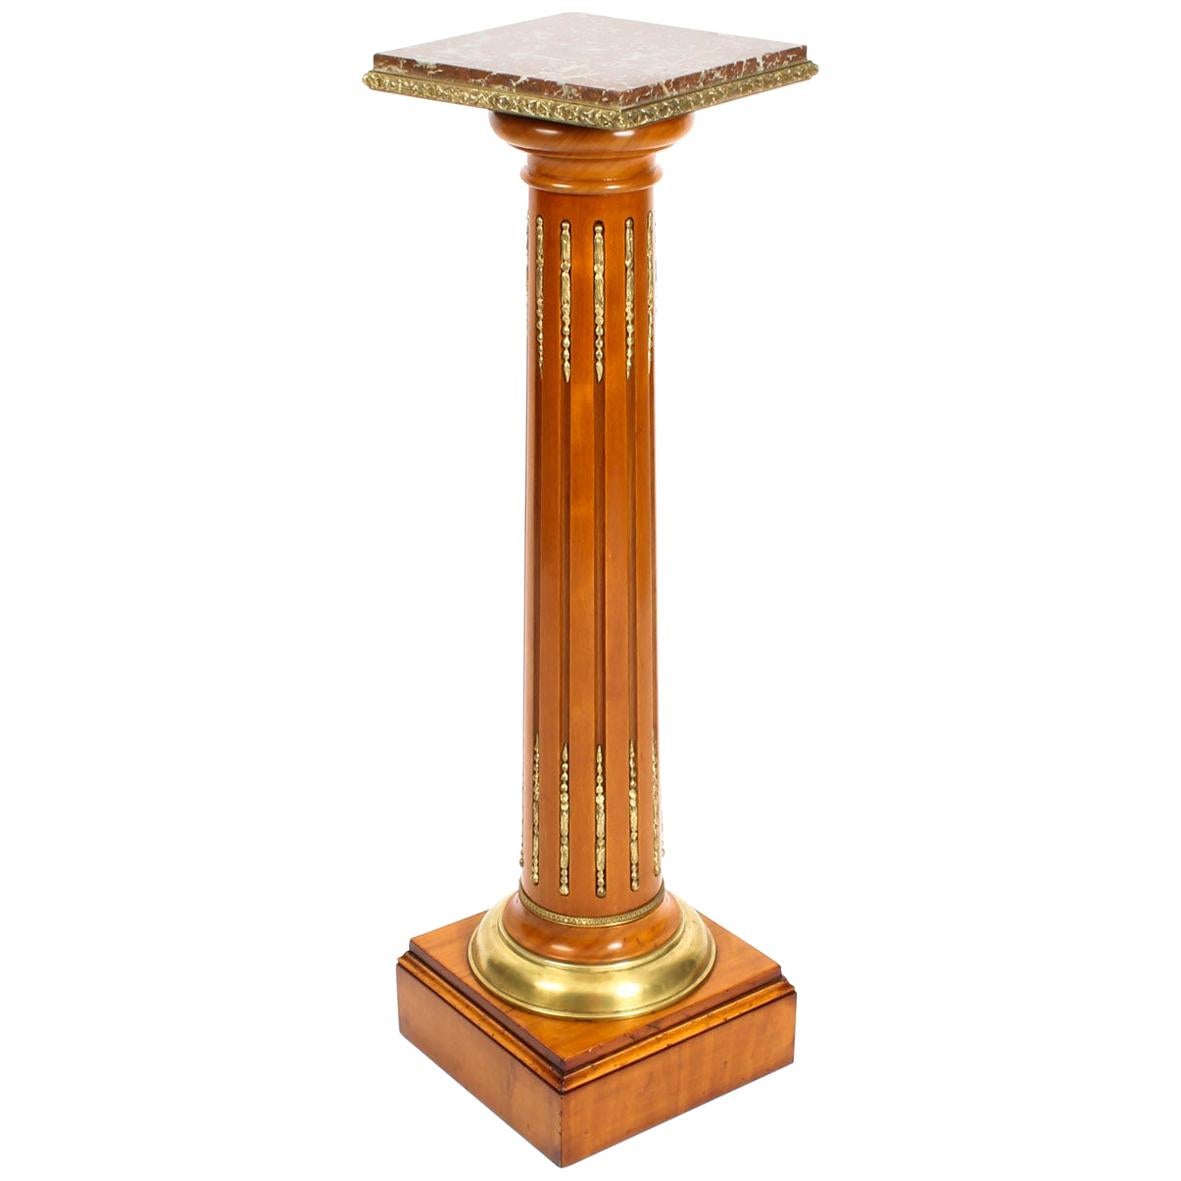 Antique French Fruitwood Ormolu Mounted Pedestal, 19th Century